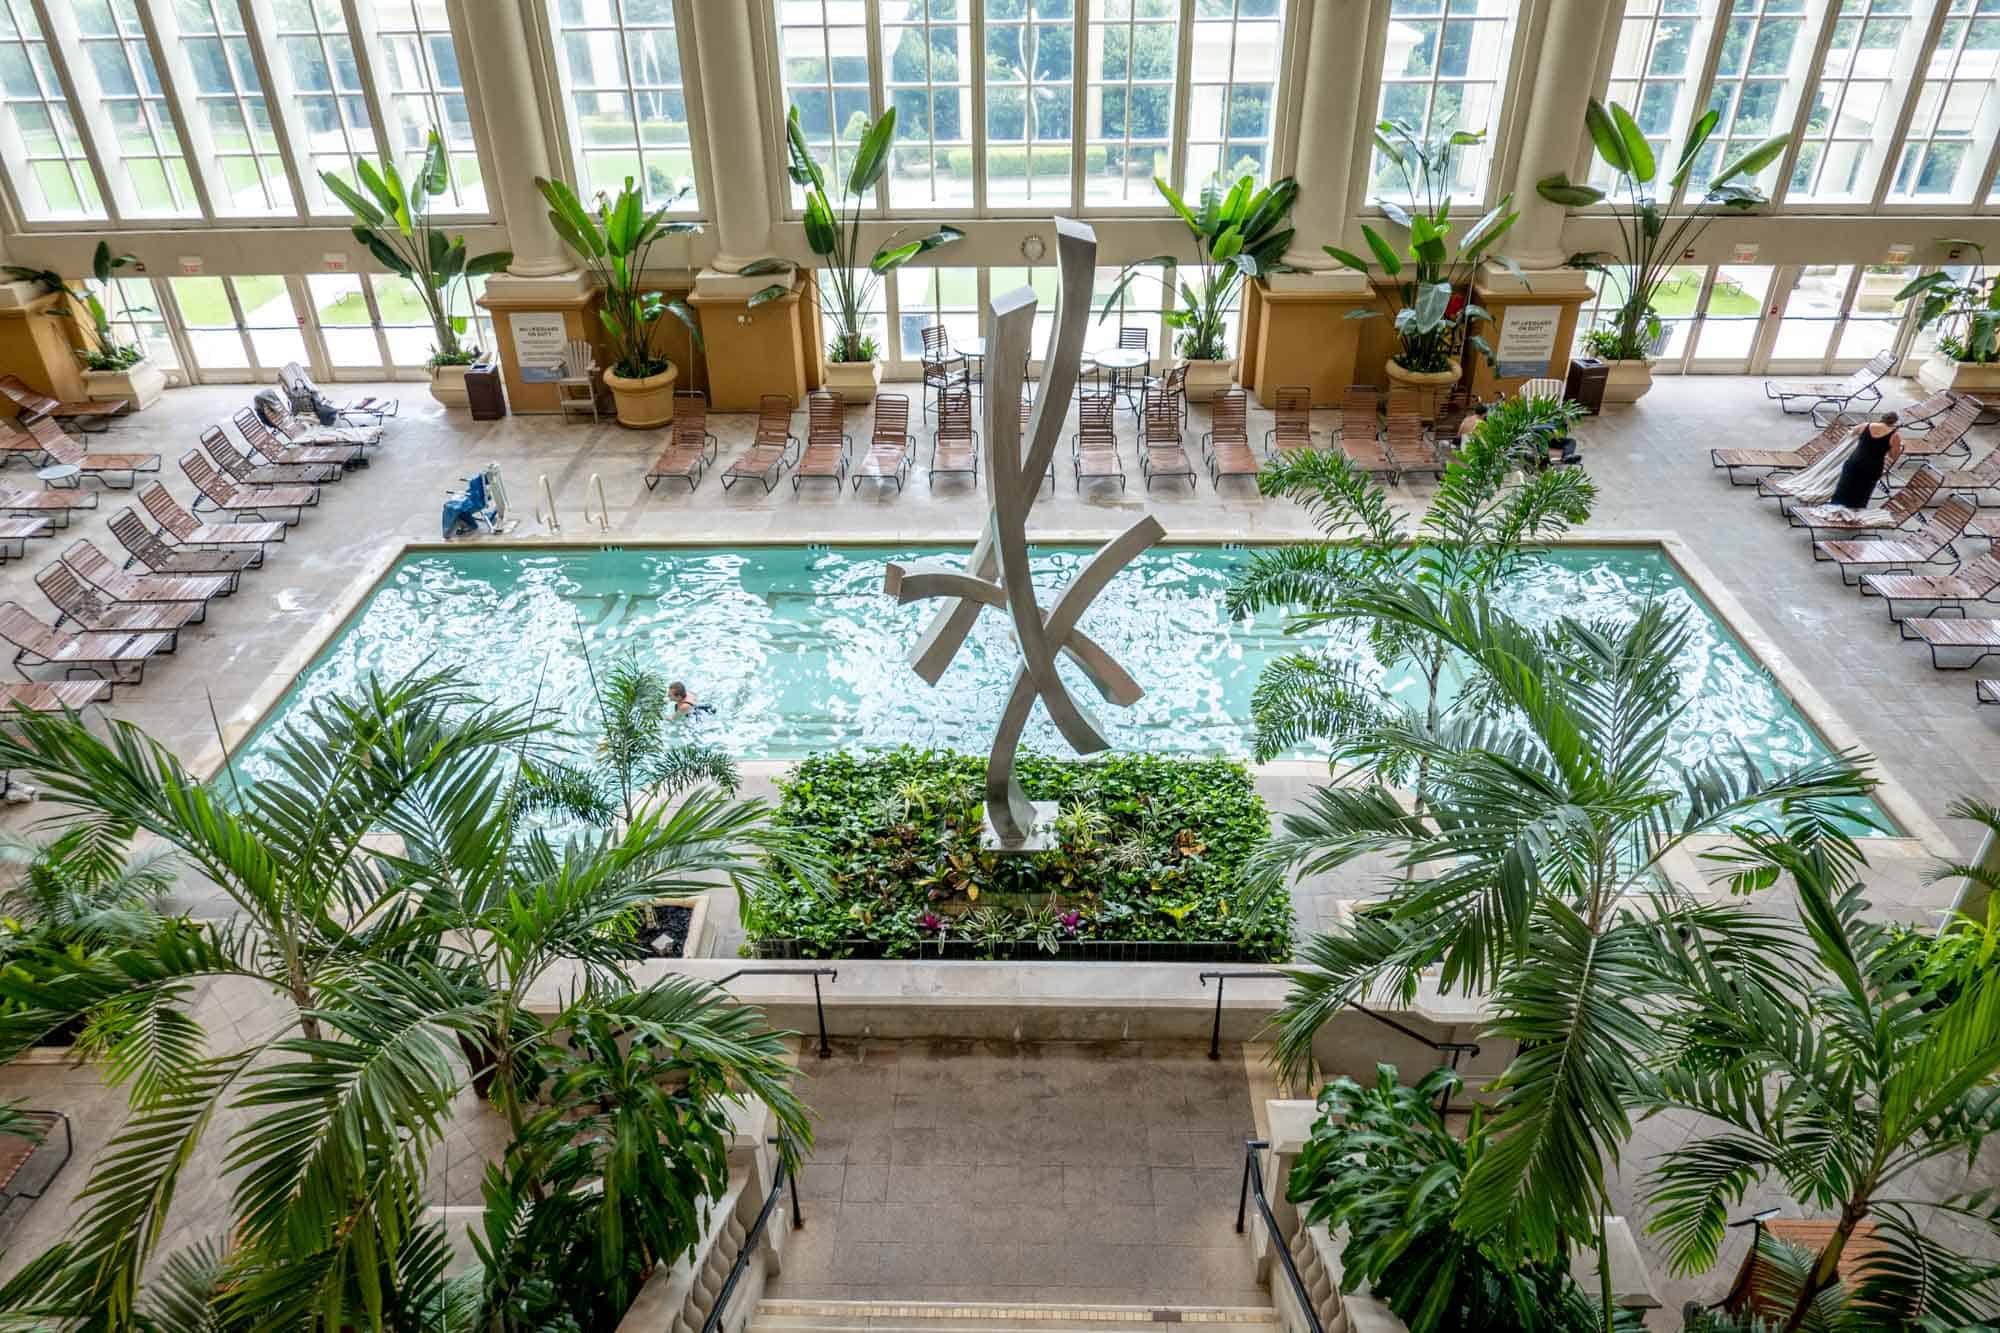 Indoor pool surrounded by pool chairs and palm trees